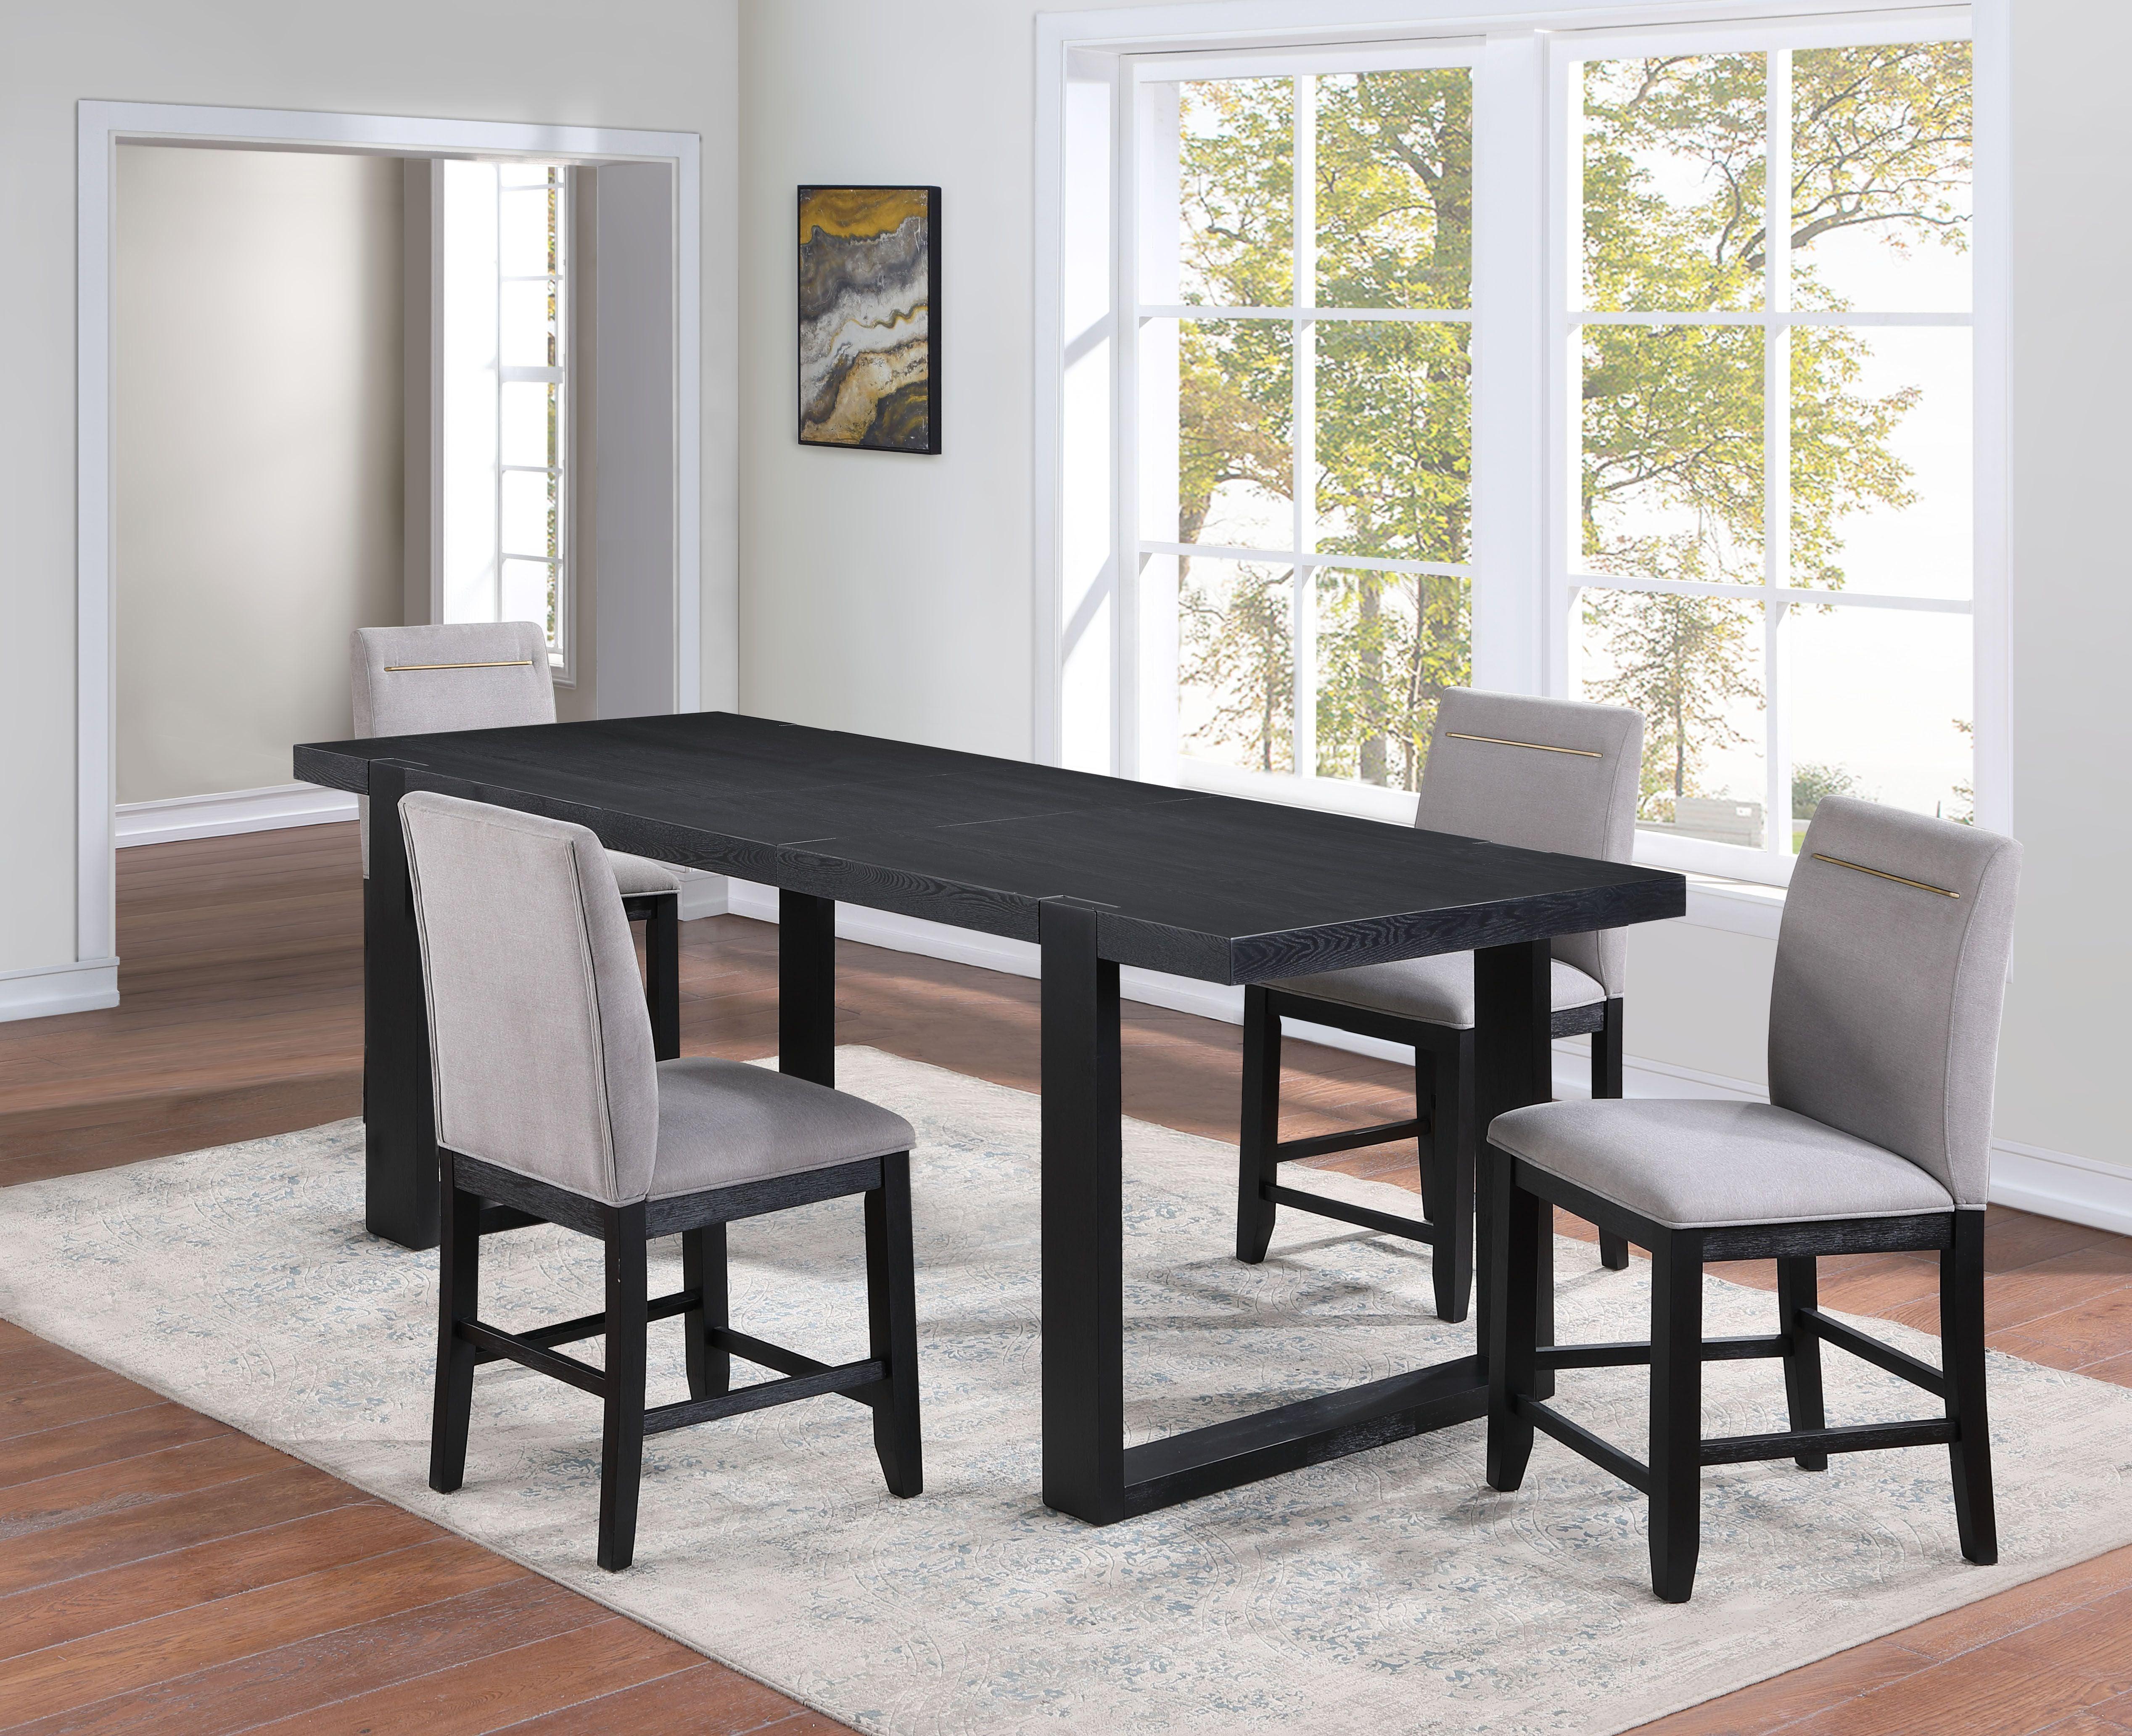 Steve Silver Furniture - Yves - Counter Height Dining Set - 5th Avenue Furniture